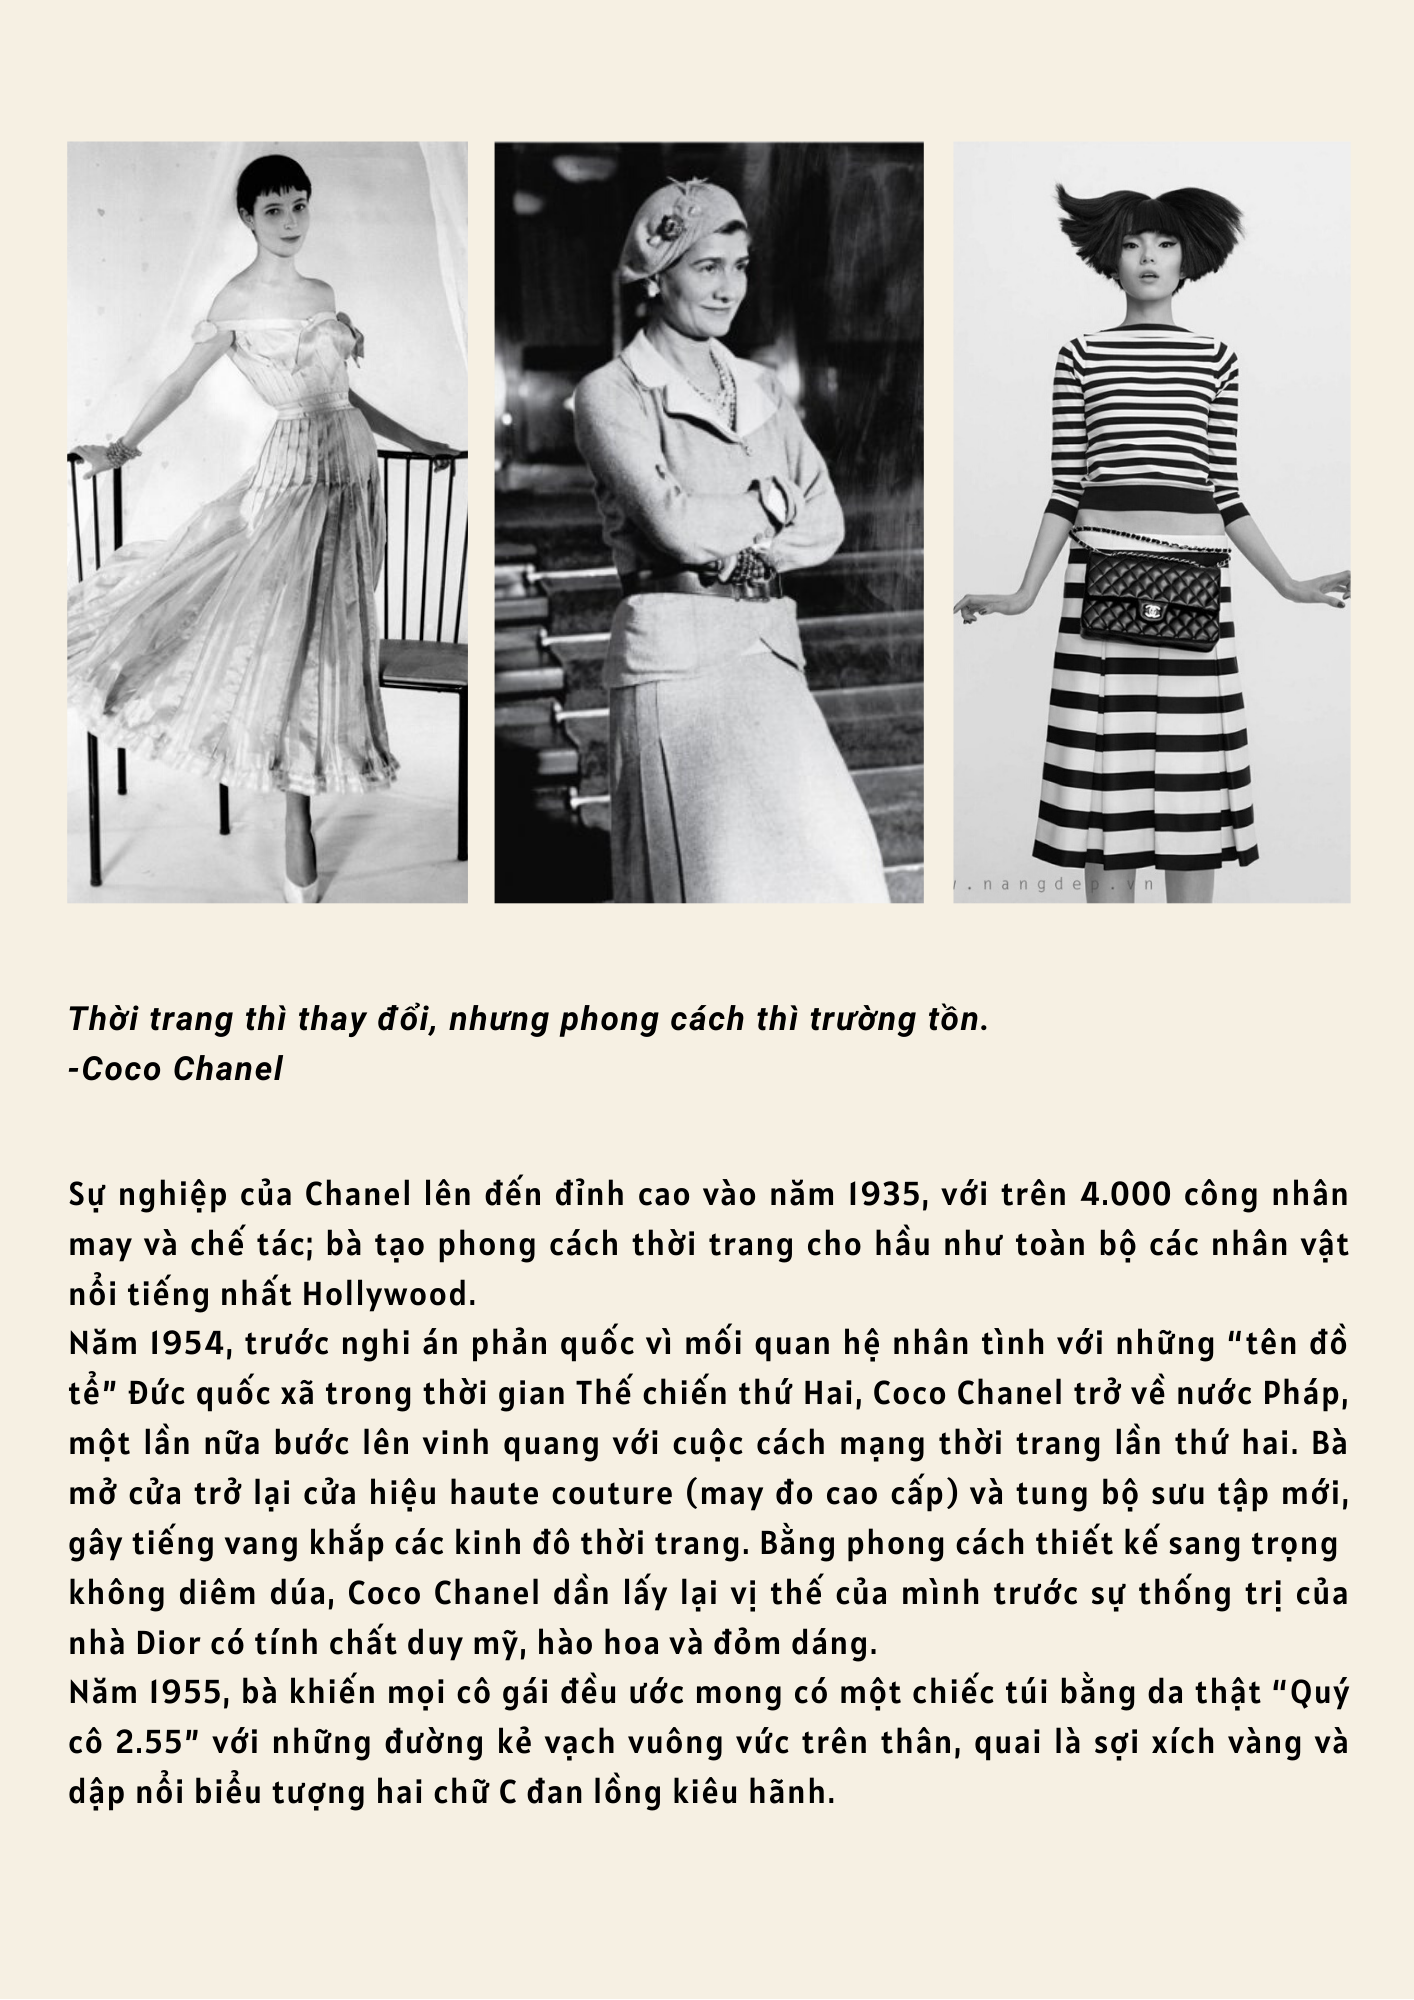 1/coco-chanel-nguoi-dinh-hinh-lai-thoi-trang-the-gioi-52_04072020112204558_gzl42aaf.ebe.png